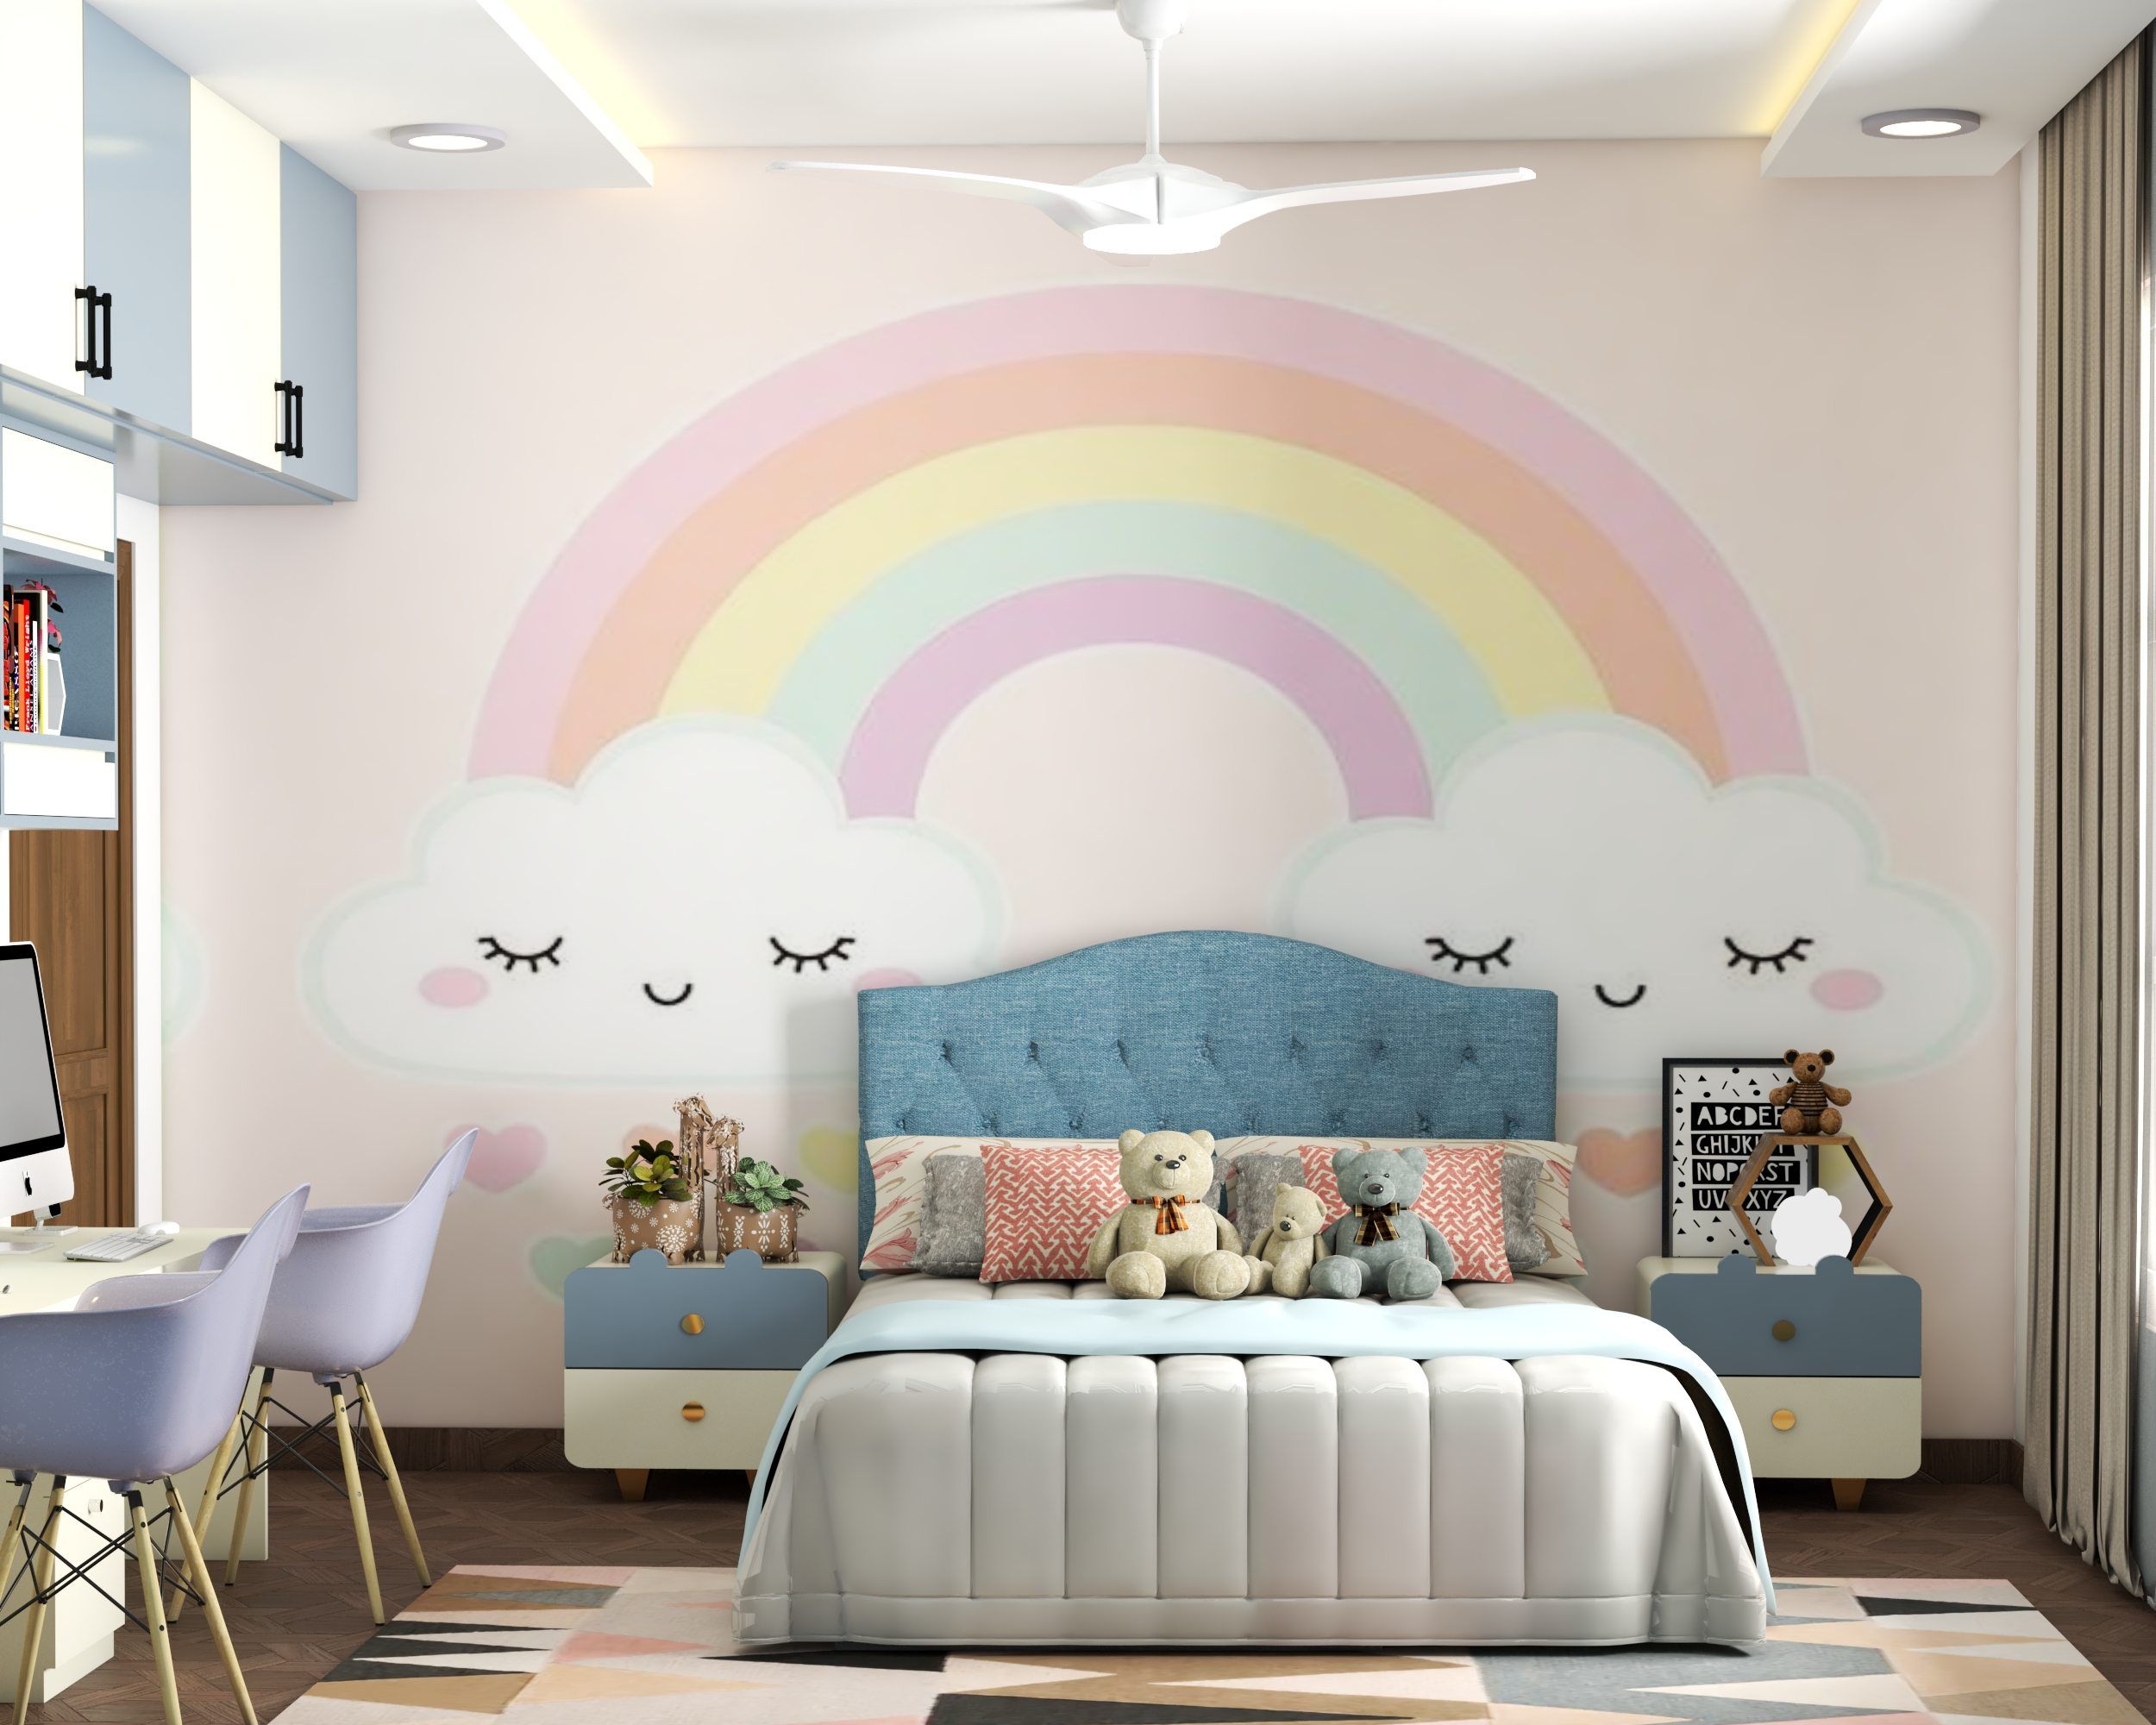 Minimal Kids Room With A Queen Size Bed And A Rainbow-Themed Wallpaper